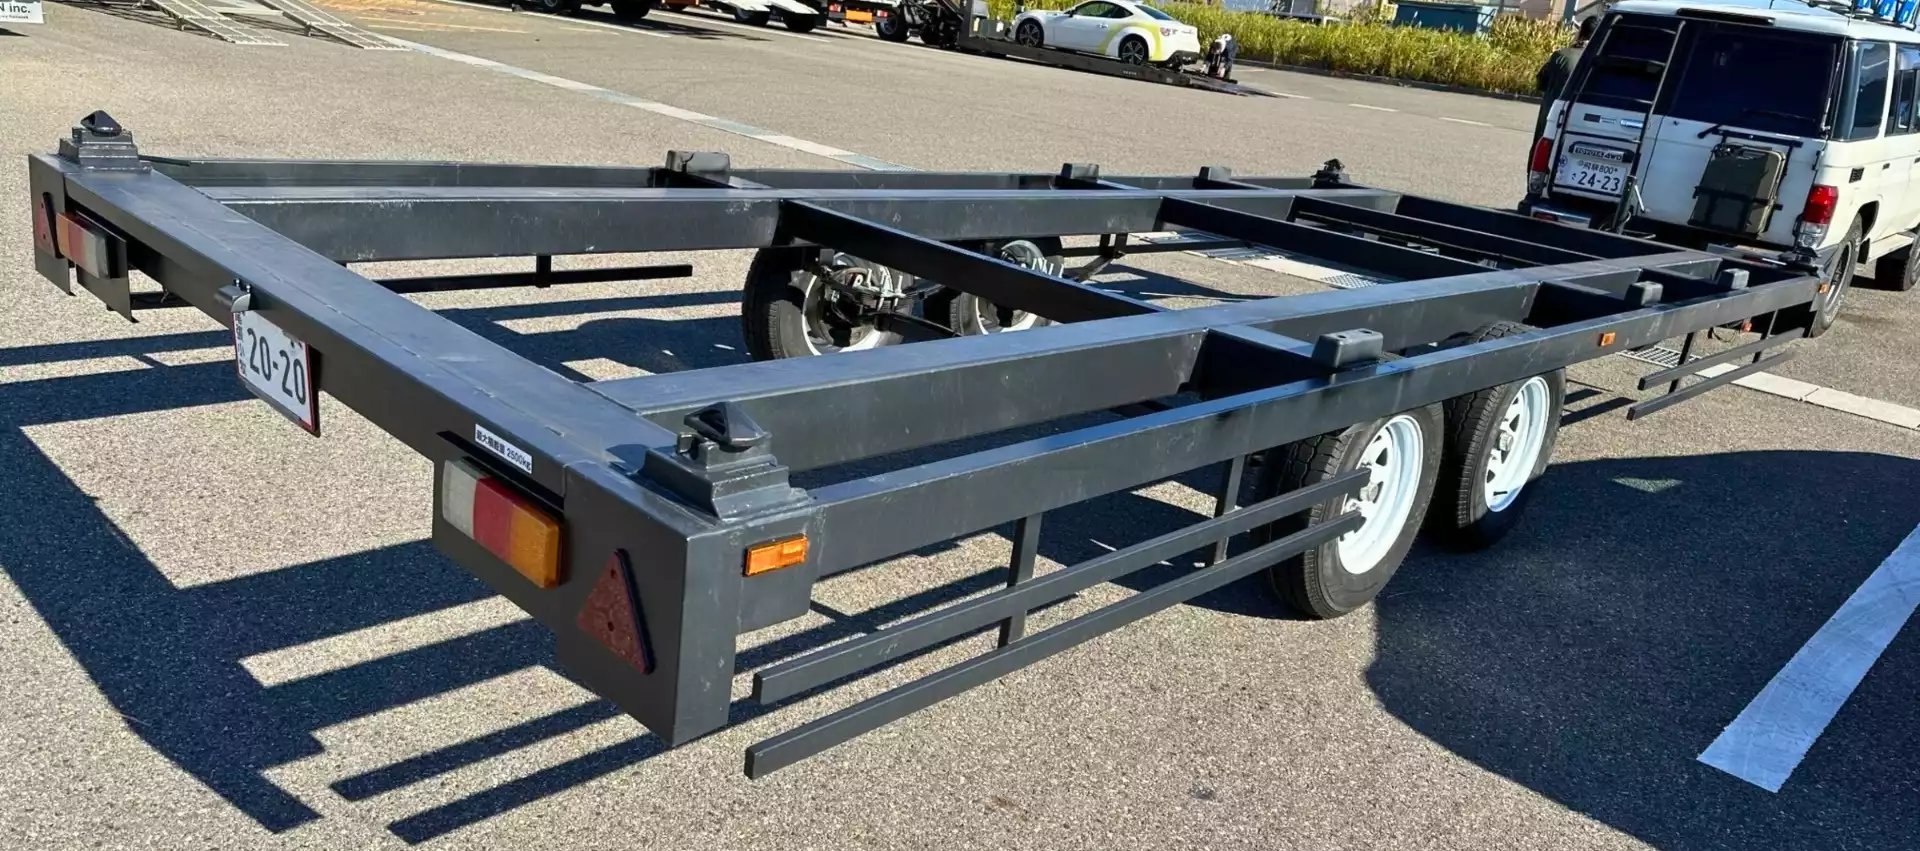 A 20ft container trailer chassis with a road license